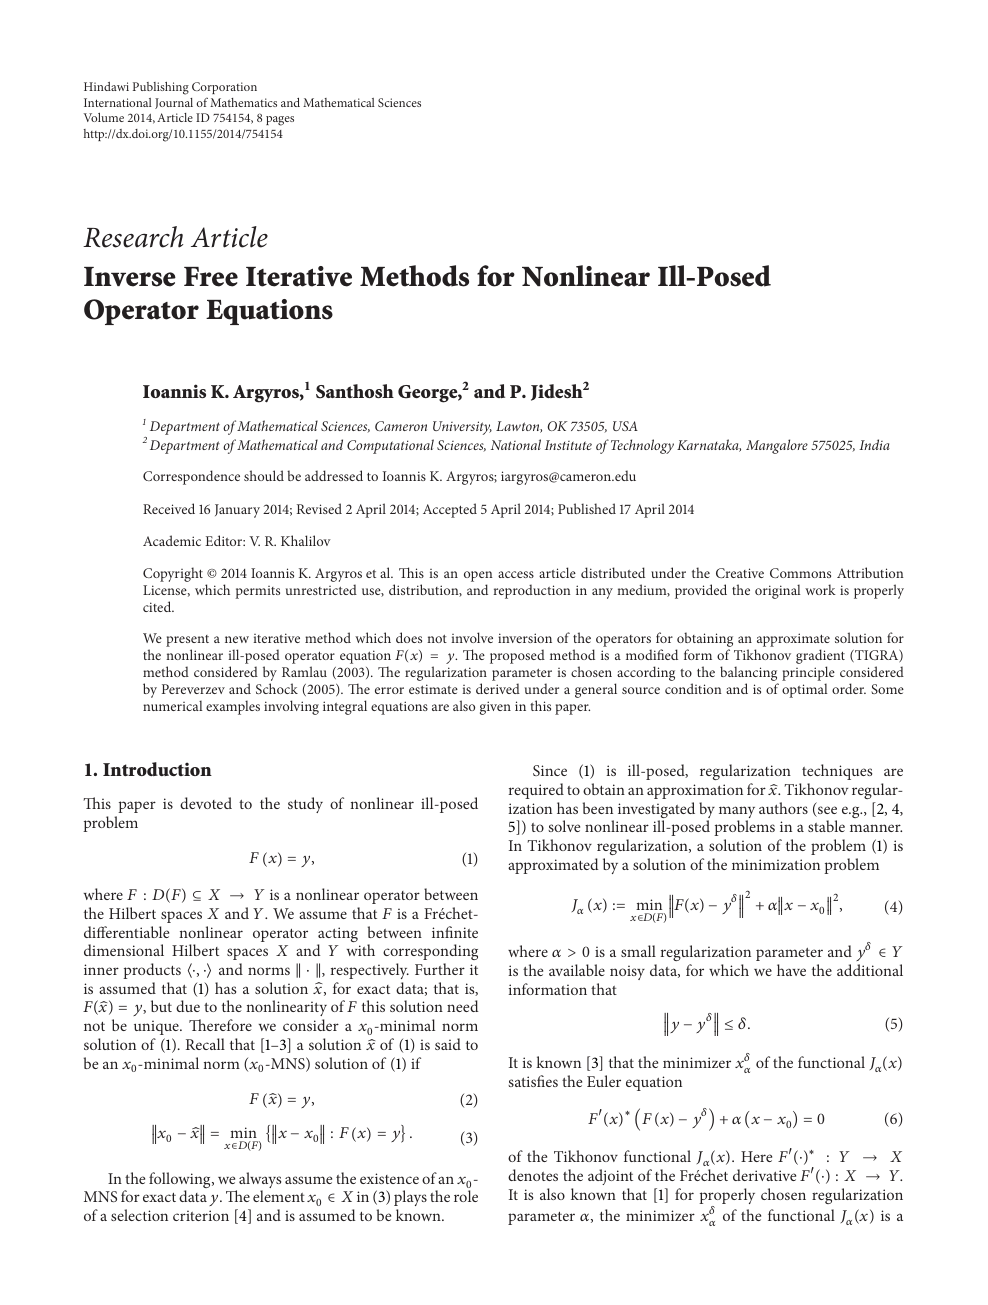 Inverse Free Iterative Methods For Nonlinear Ill Posed Operator Equations Topic Of Research Paper In Mathematics Download Scholarly Article Pdf And Read For Free On Cyberleninka Open Science Hub